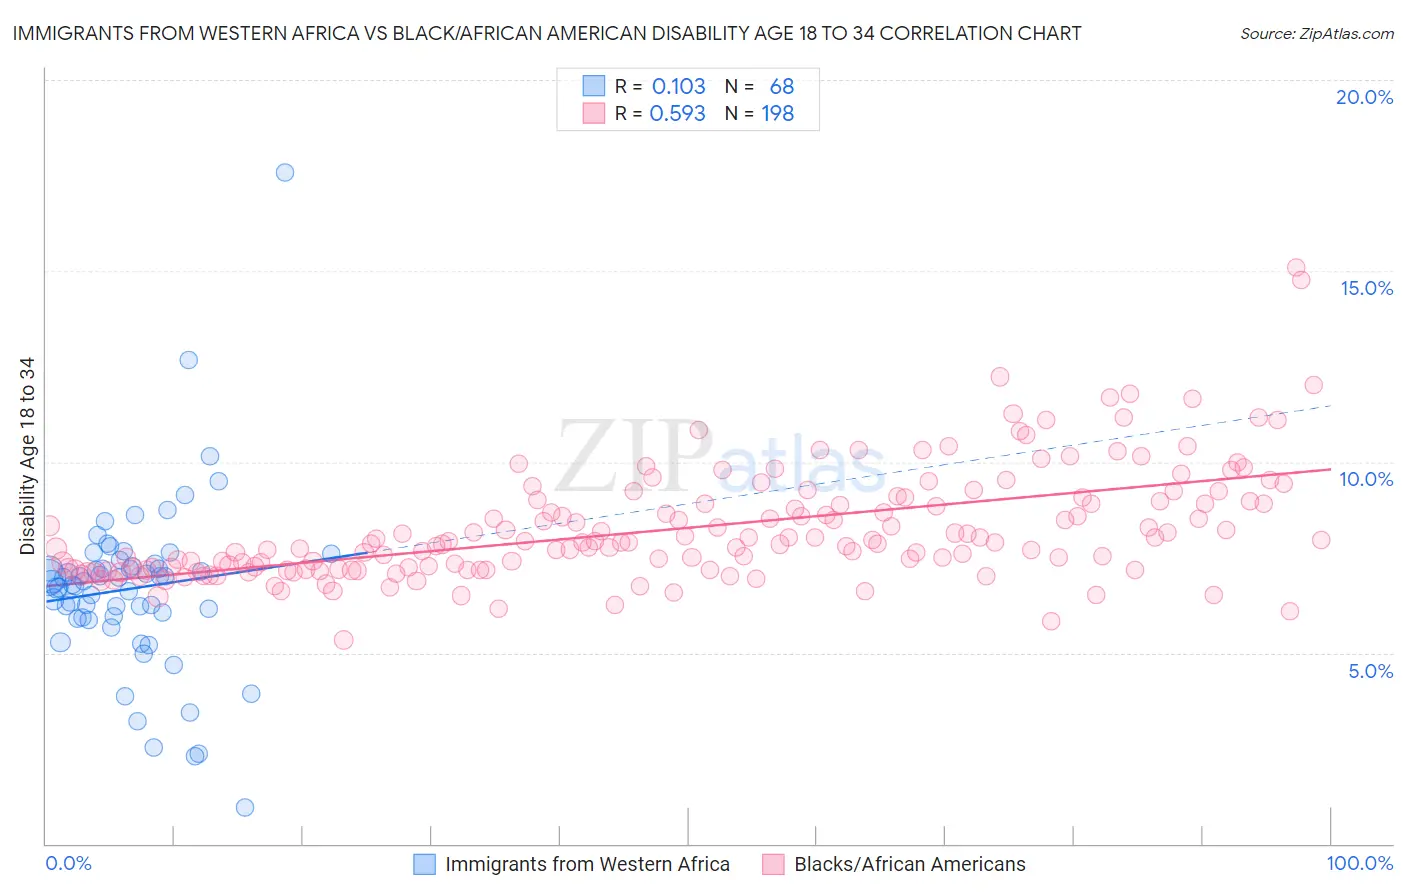 Immigrants from Western Africa vs Black/African American Disability Age 18 to 34